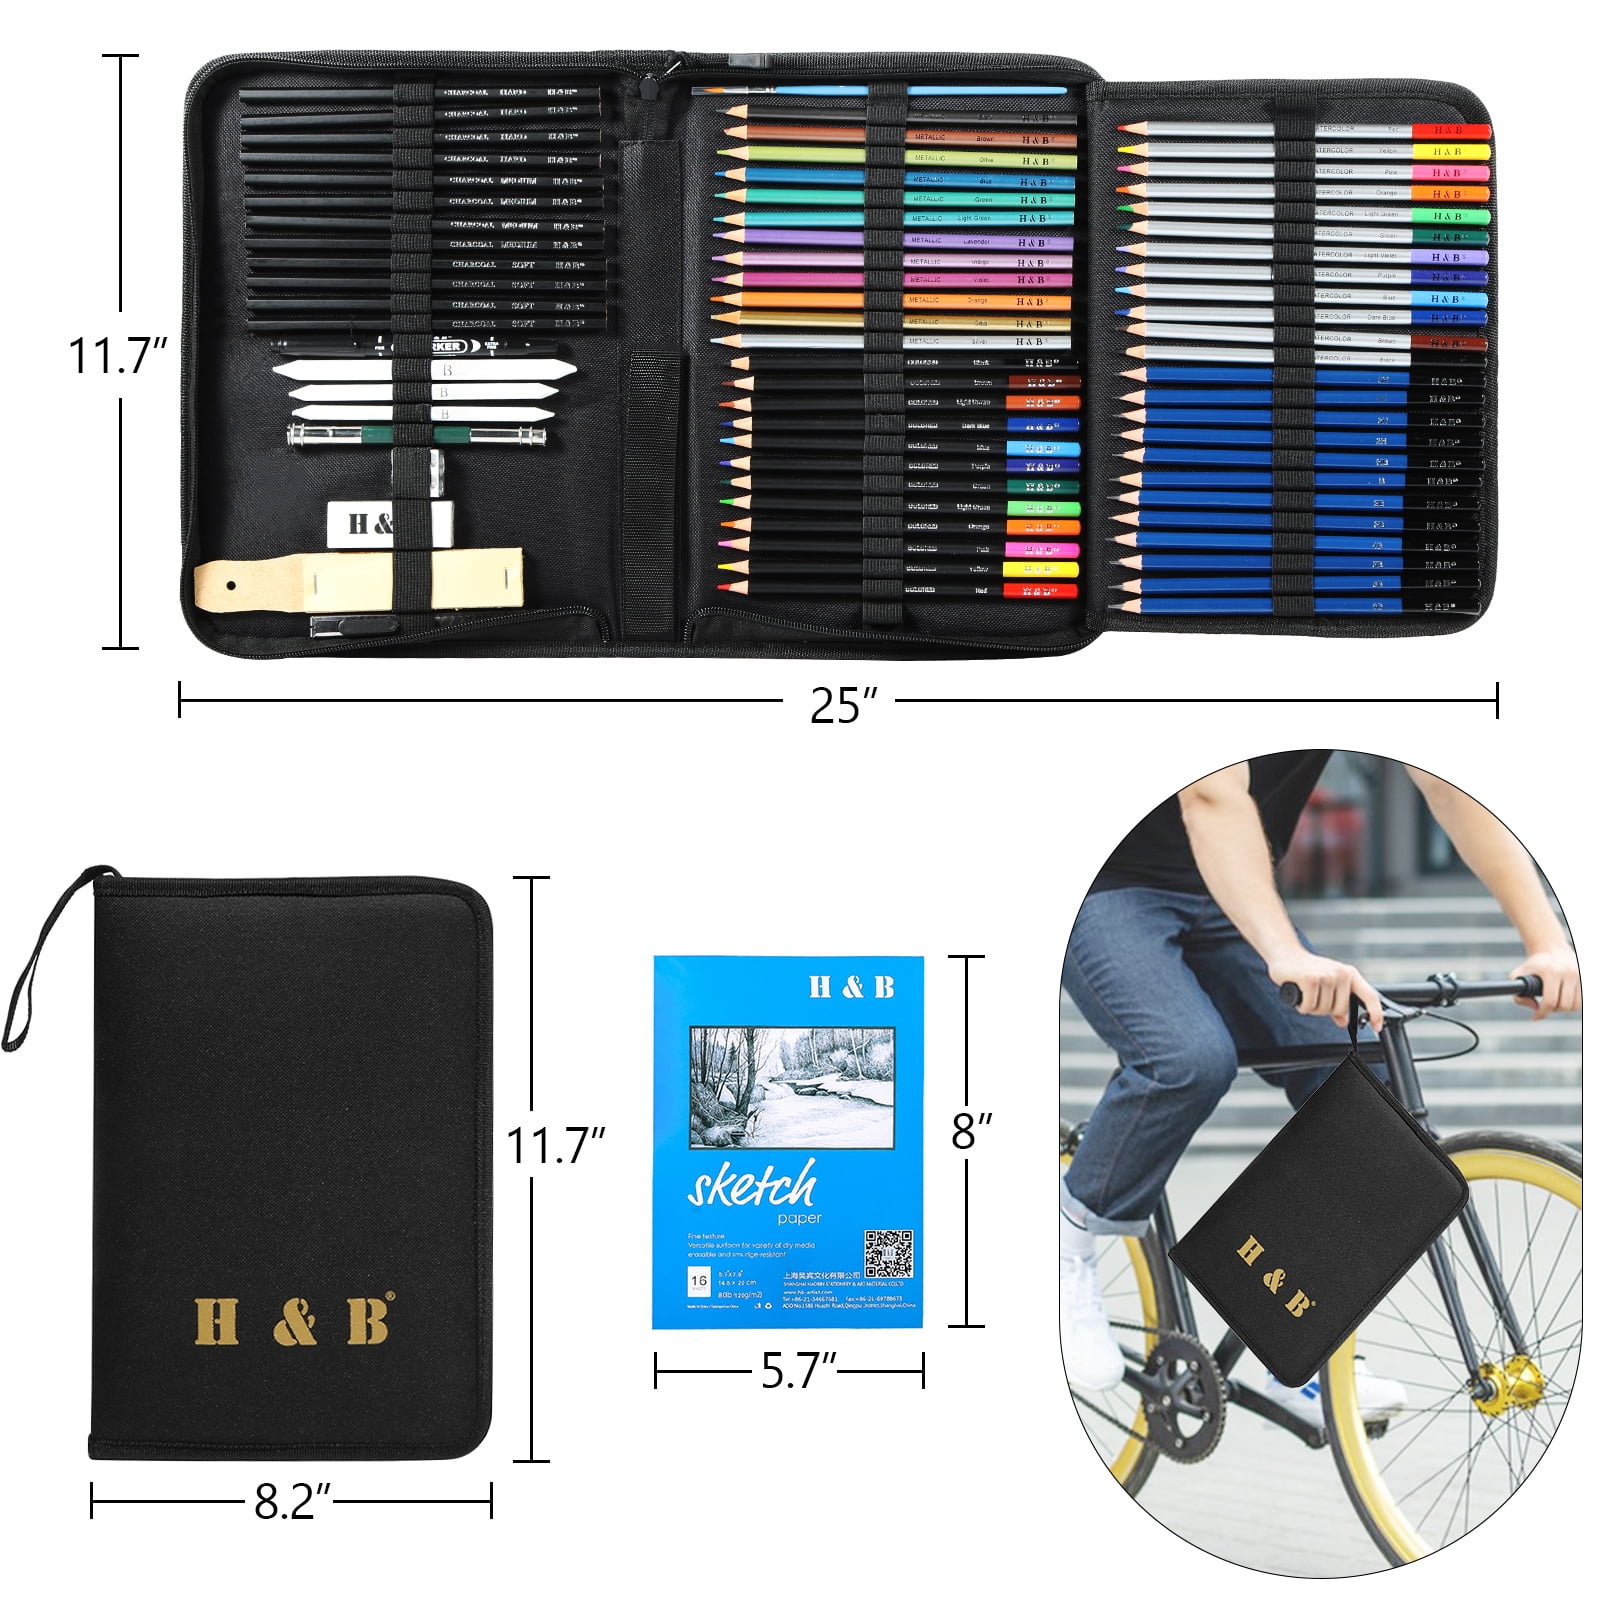 72 Pcs Art Supplies Art Set,Drawing Supply for Artist Adult Teen Kids, Drawing Pencils Kit,Sketching Set Include Charcoal & Colored  Pencil,Sketchbook,Coloring Book in Travel Case 